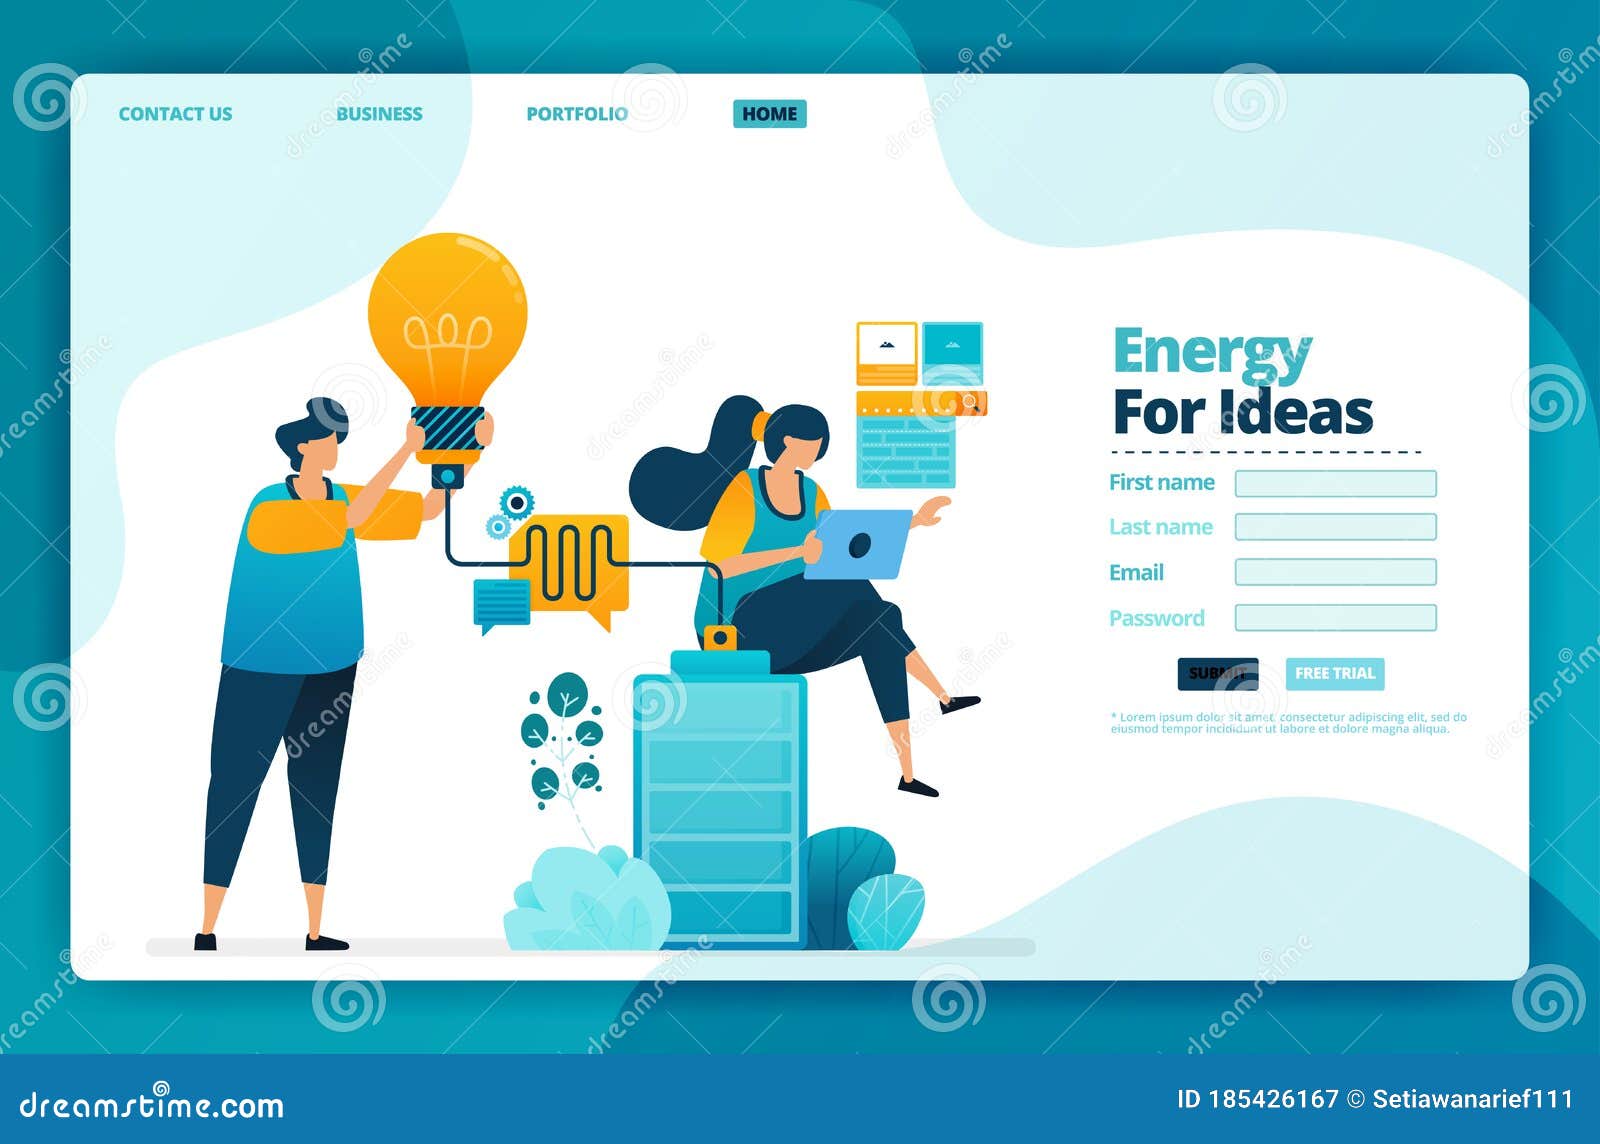 Landing Page Vector Design of Energy for Ideas. Design for Website Inside Welcome Brochure Template